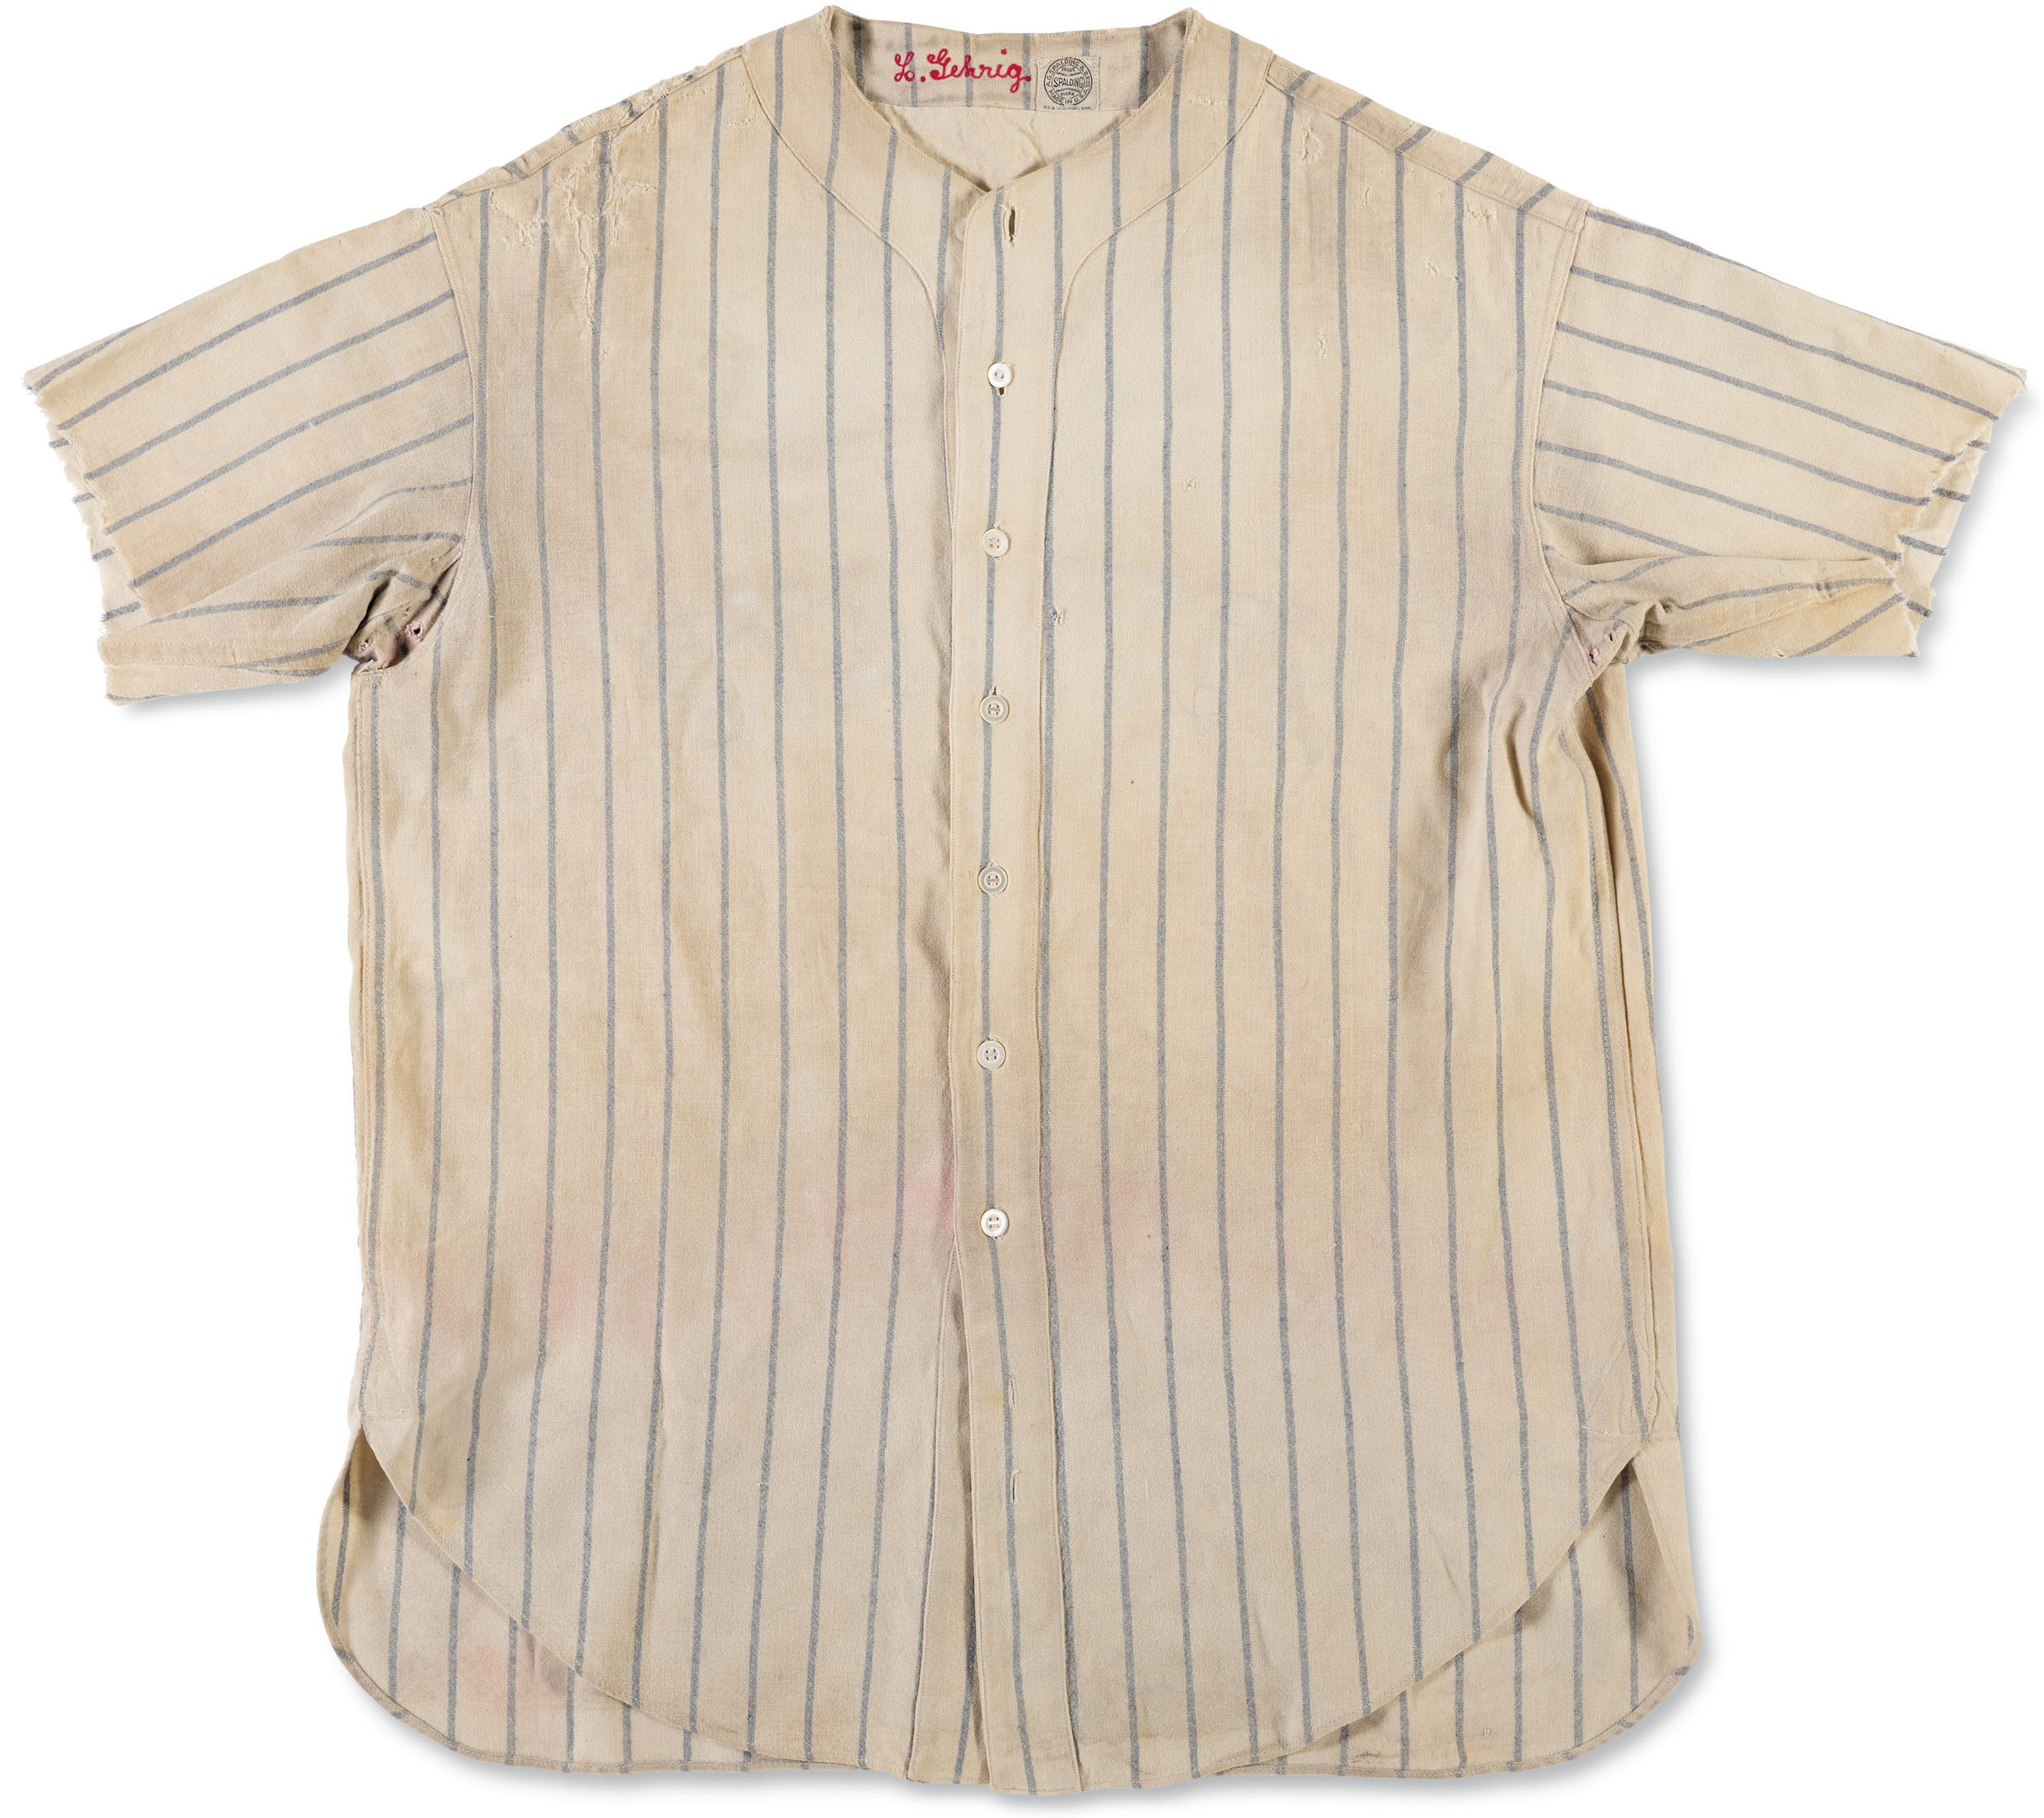 A 1931 Lou Gehrig Jersey Is Expected to Sell for $1.5 Million - Bloomberg